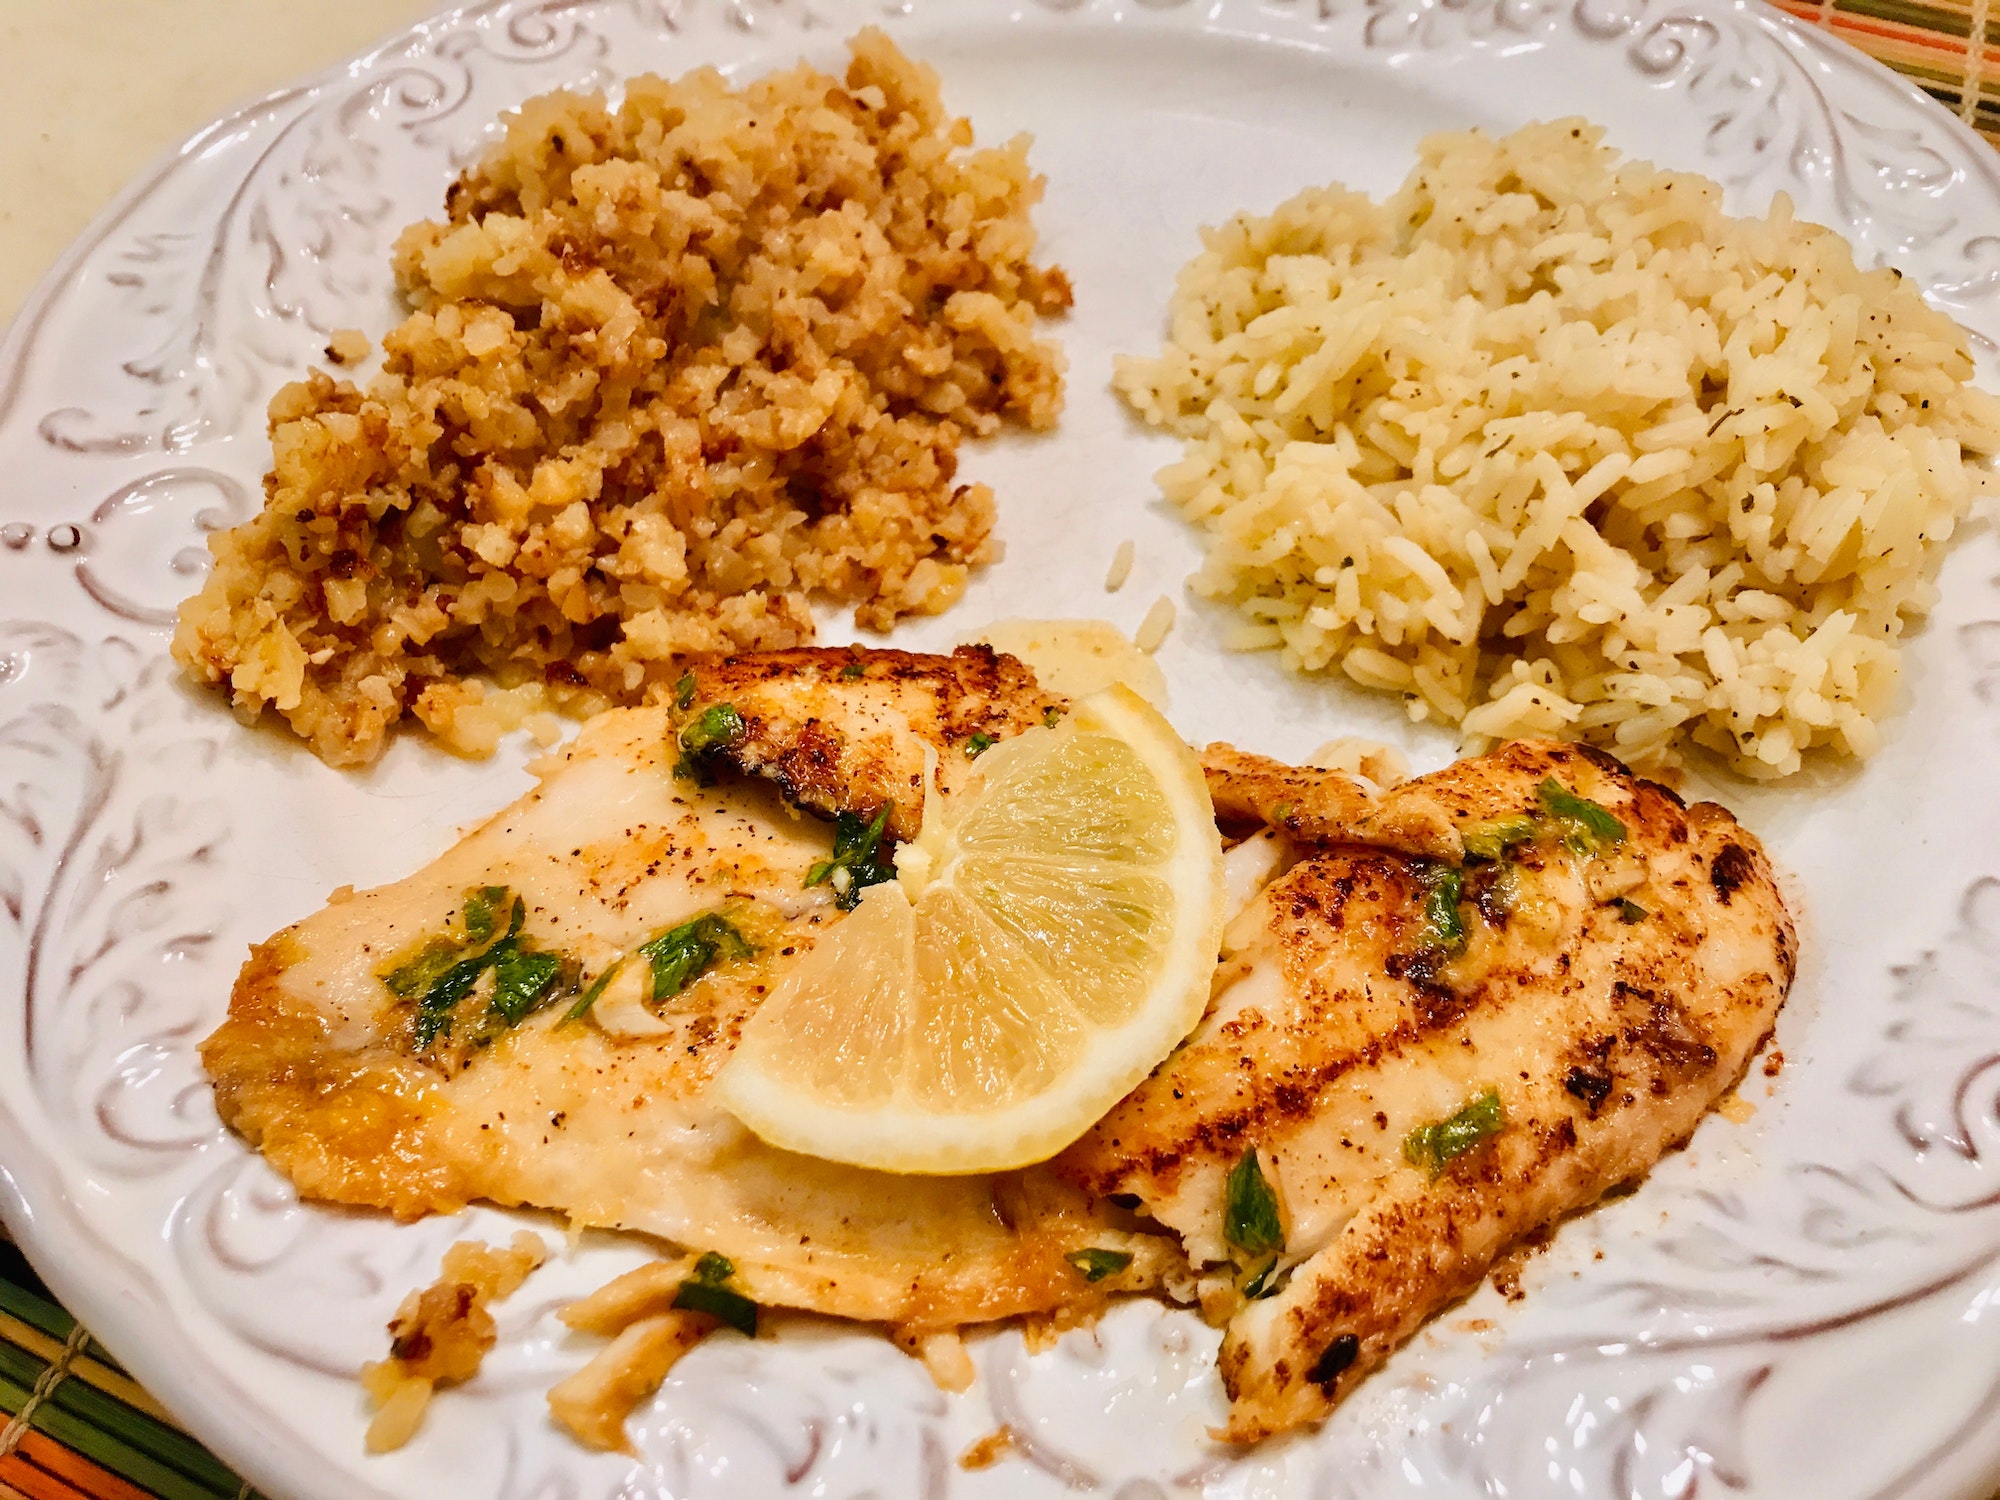 Freshly cooked, mouth watering, oven baked Lemon Tilapia with garlic and herbs